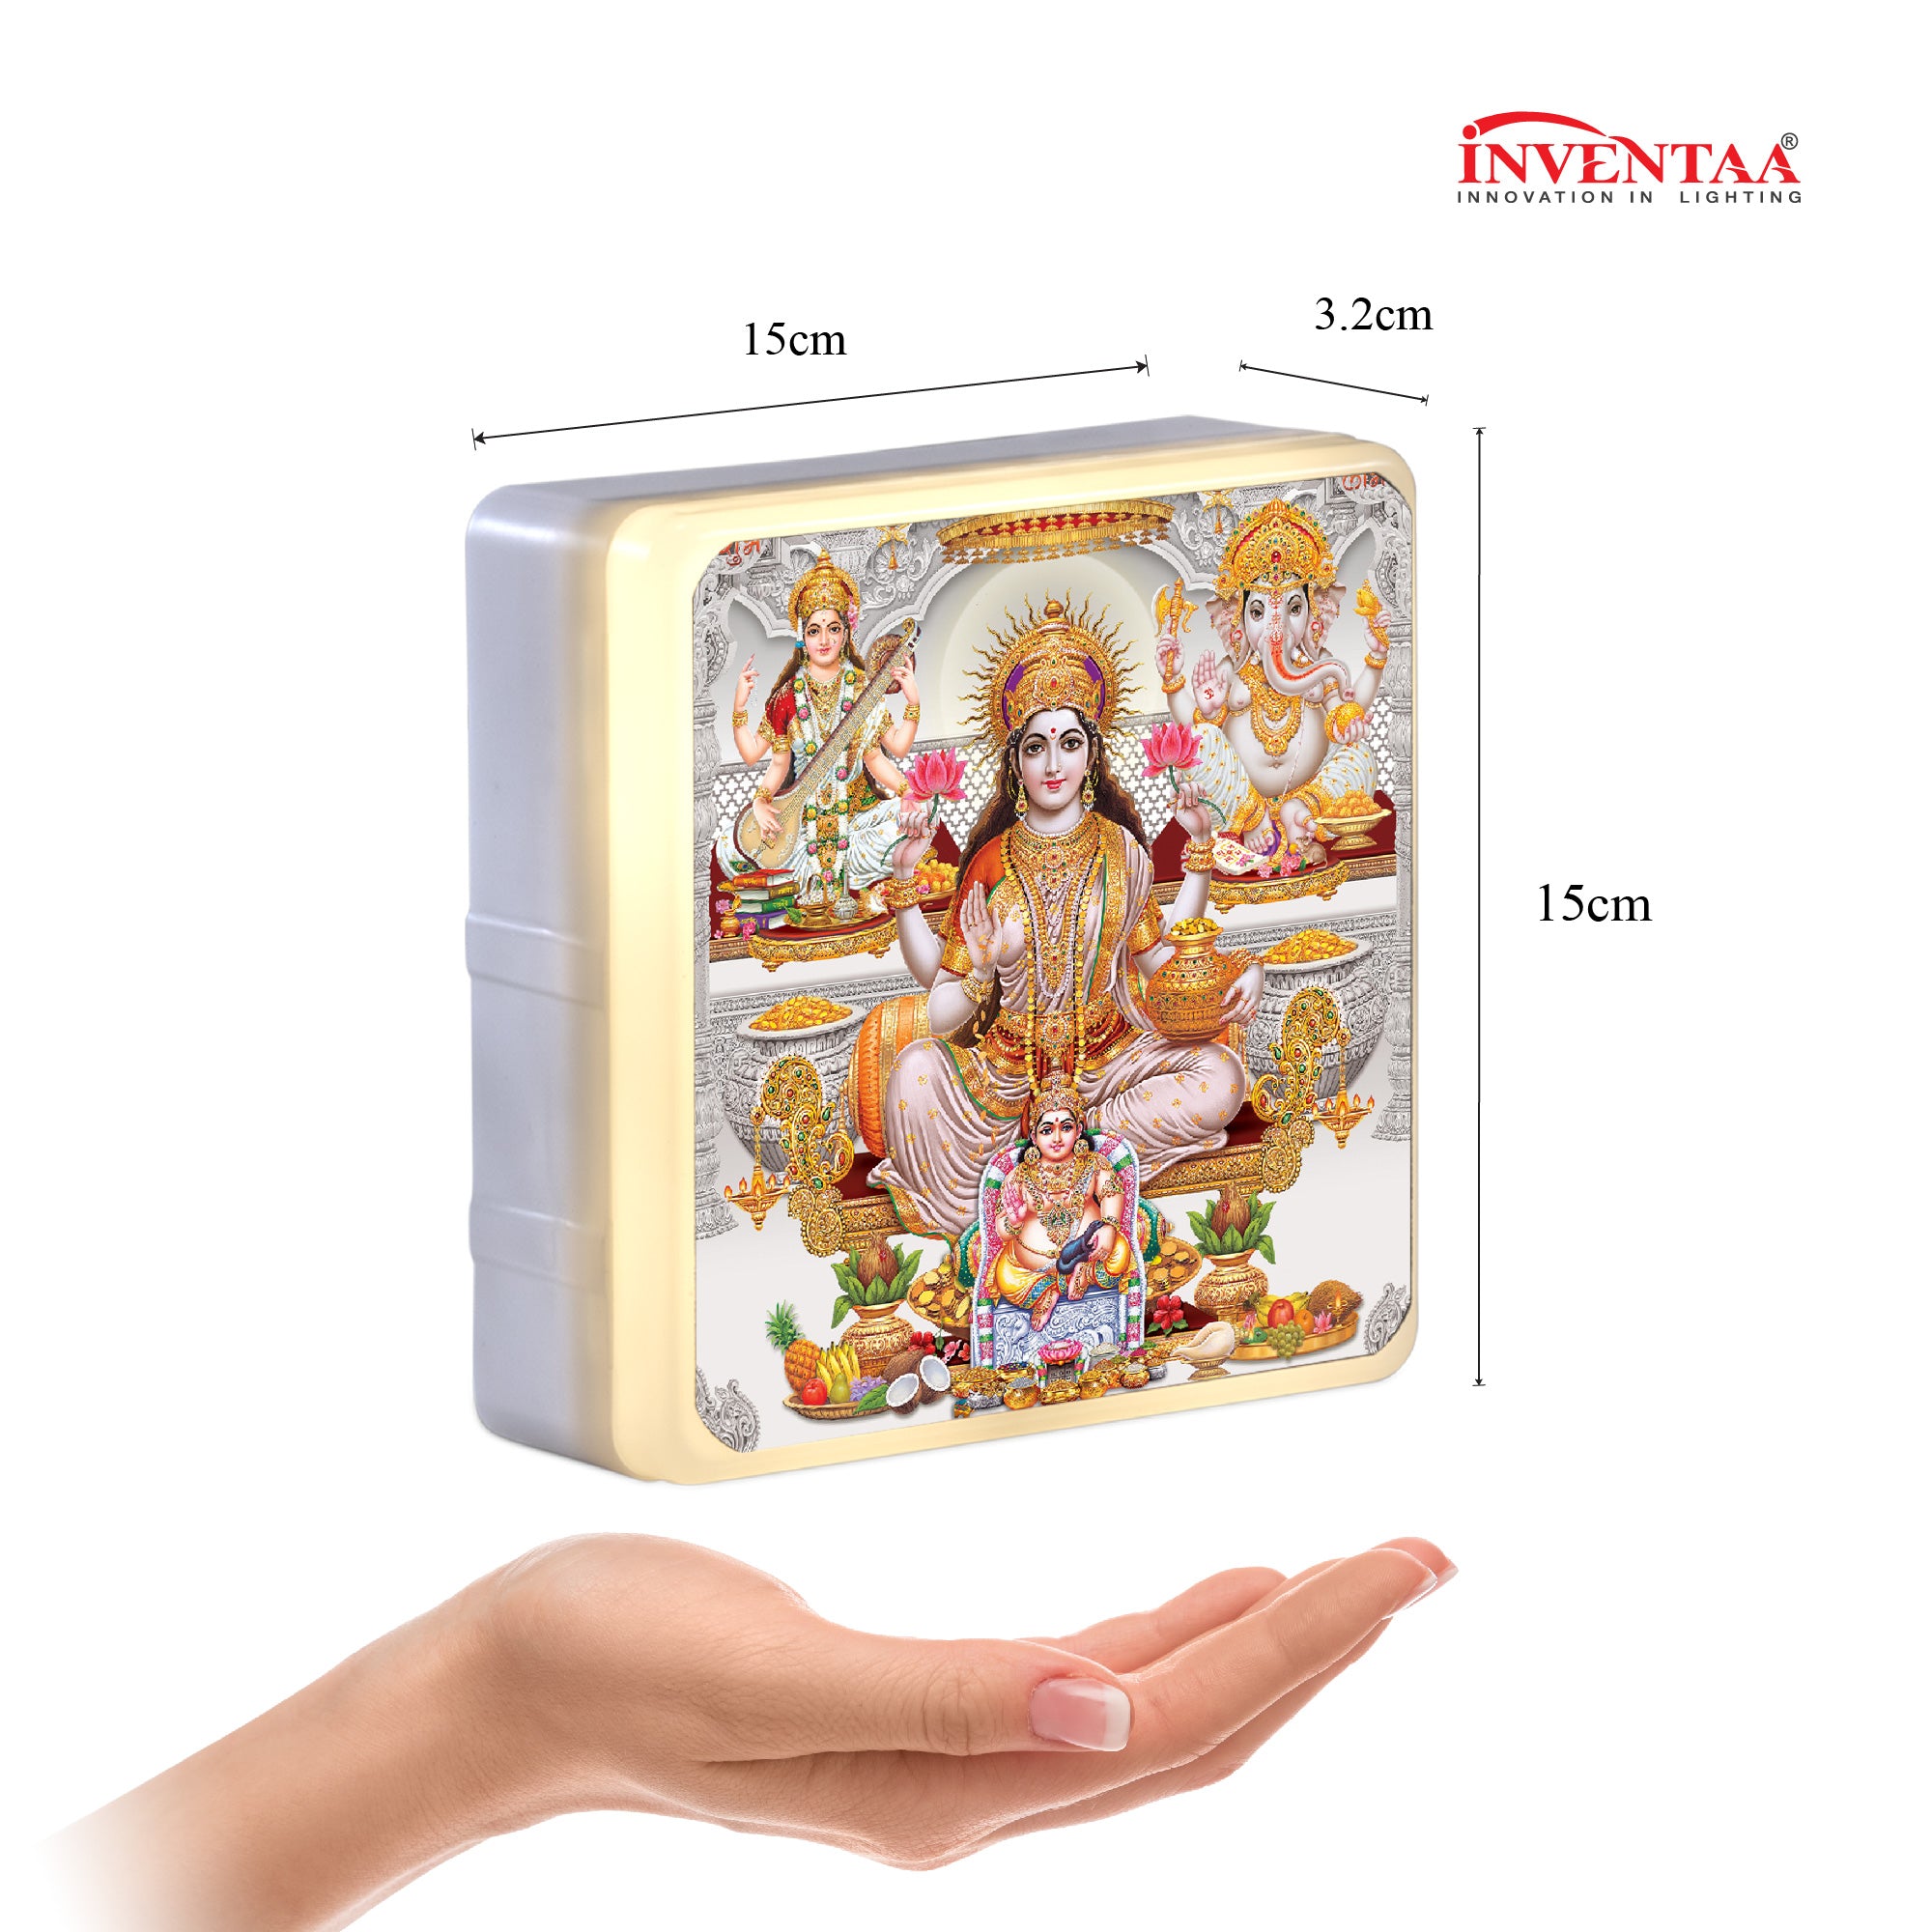 Godess Saraswathi Divine LED Outdoor Wall Light For Pooja Room With 2 Years Replacement Warranty